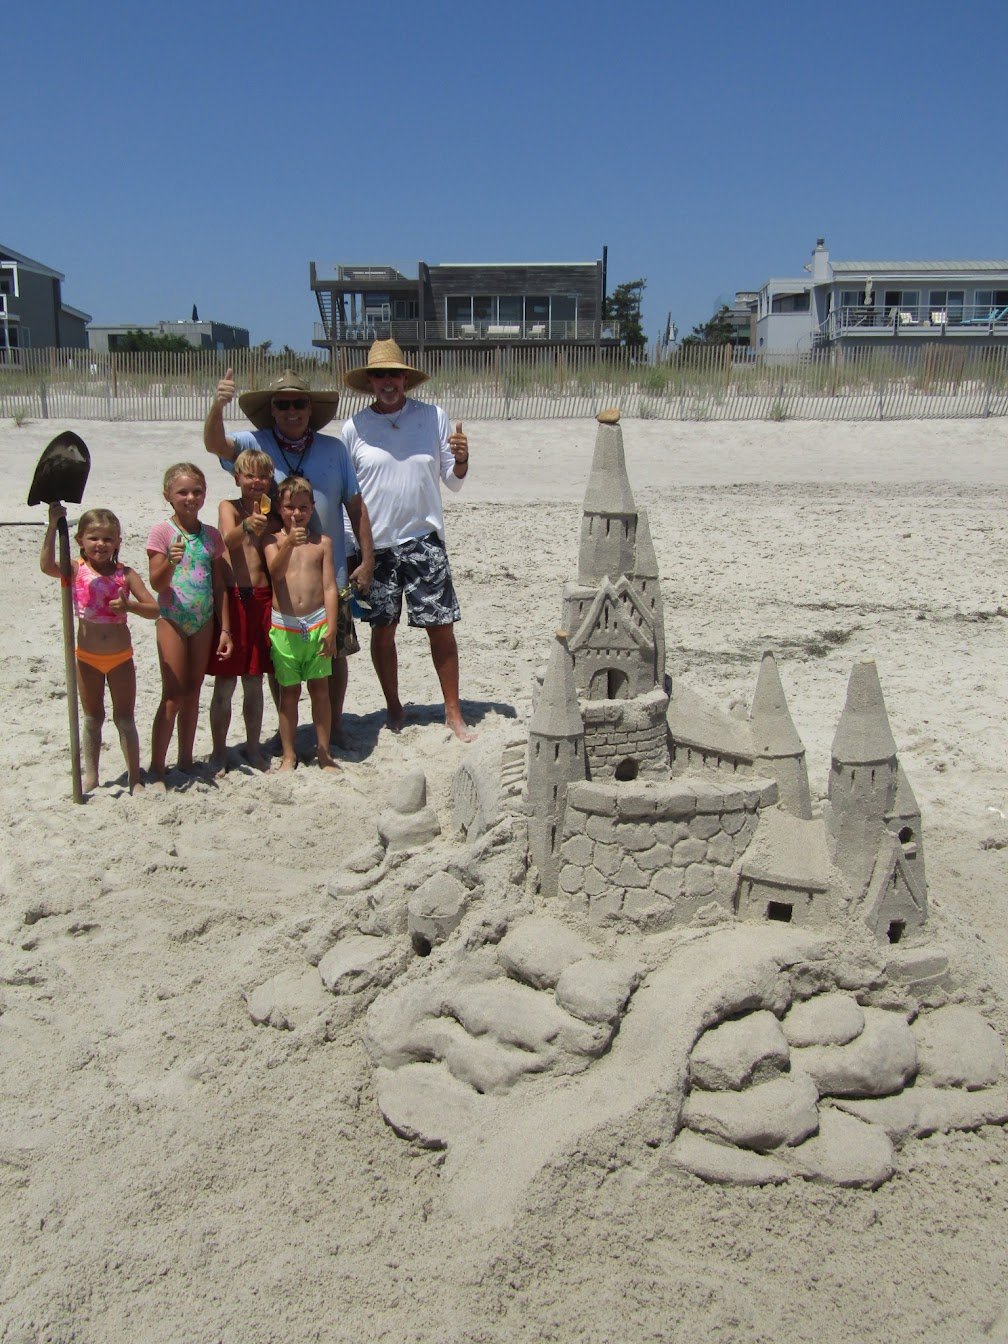 “Sand Town USA” by team members Darrell O’Connor, Brian Kerr (adults pictured), Ila and Frances Robbins (sisters), Wade and Cole Krager. (Copy)